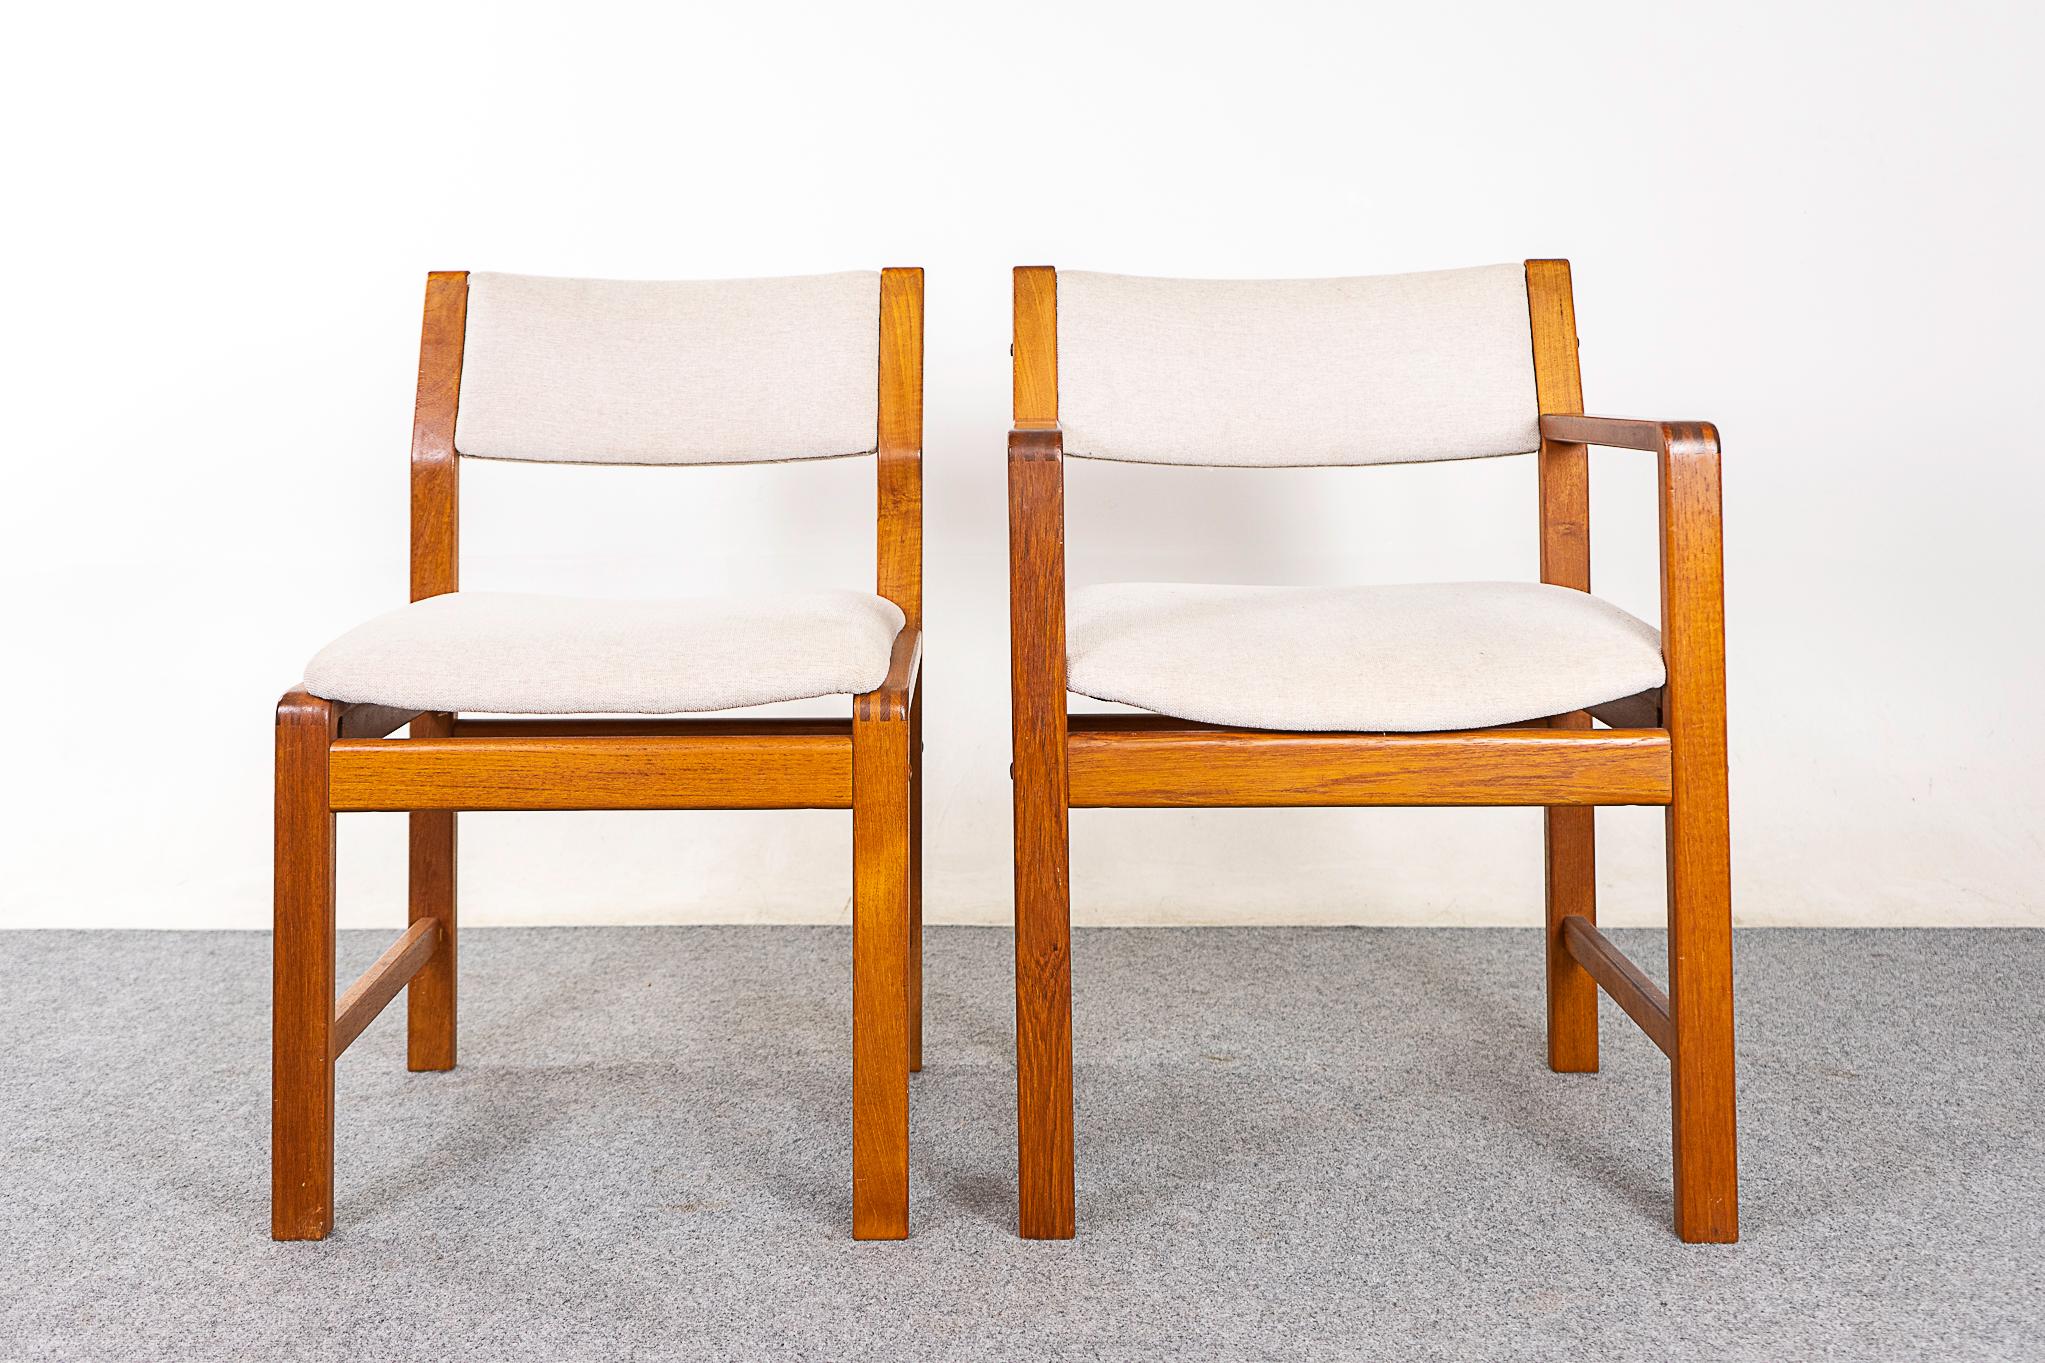 Teak dining chairs, circa 1980's. Simple, sturdy design with 2 captain's chairs.  

Unrestored item with option to purchase in restored condition. Restoration includes: repairs, sanding, staining and an oil finish. Reupholstery not included.

Please